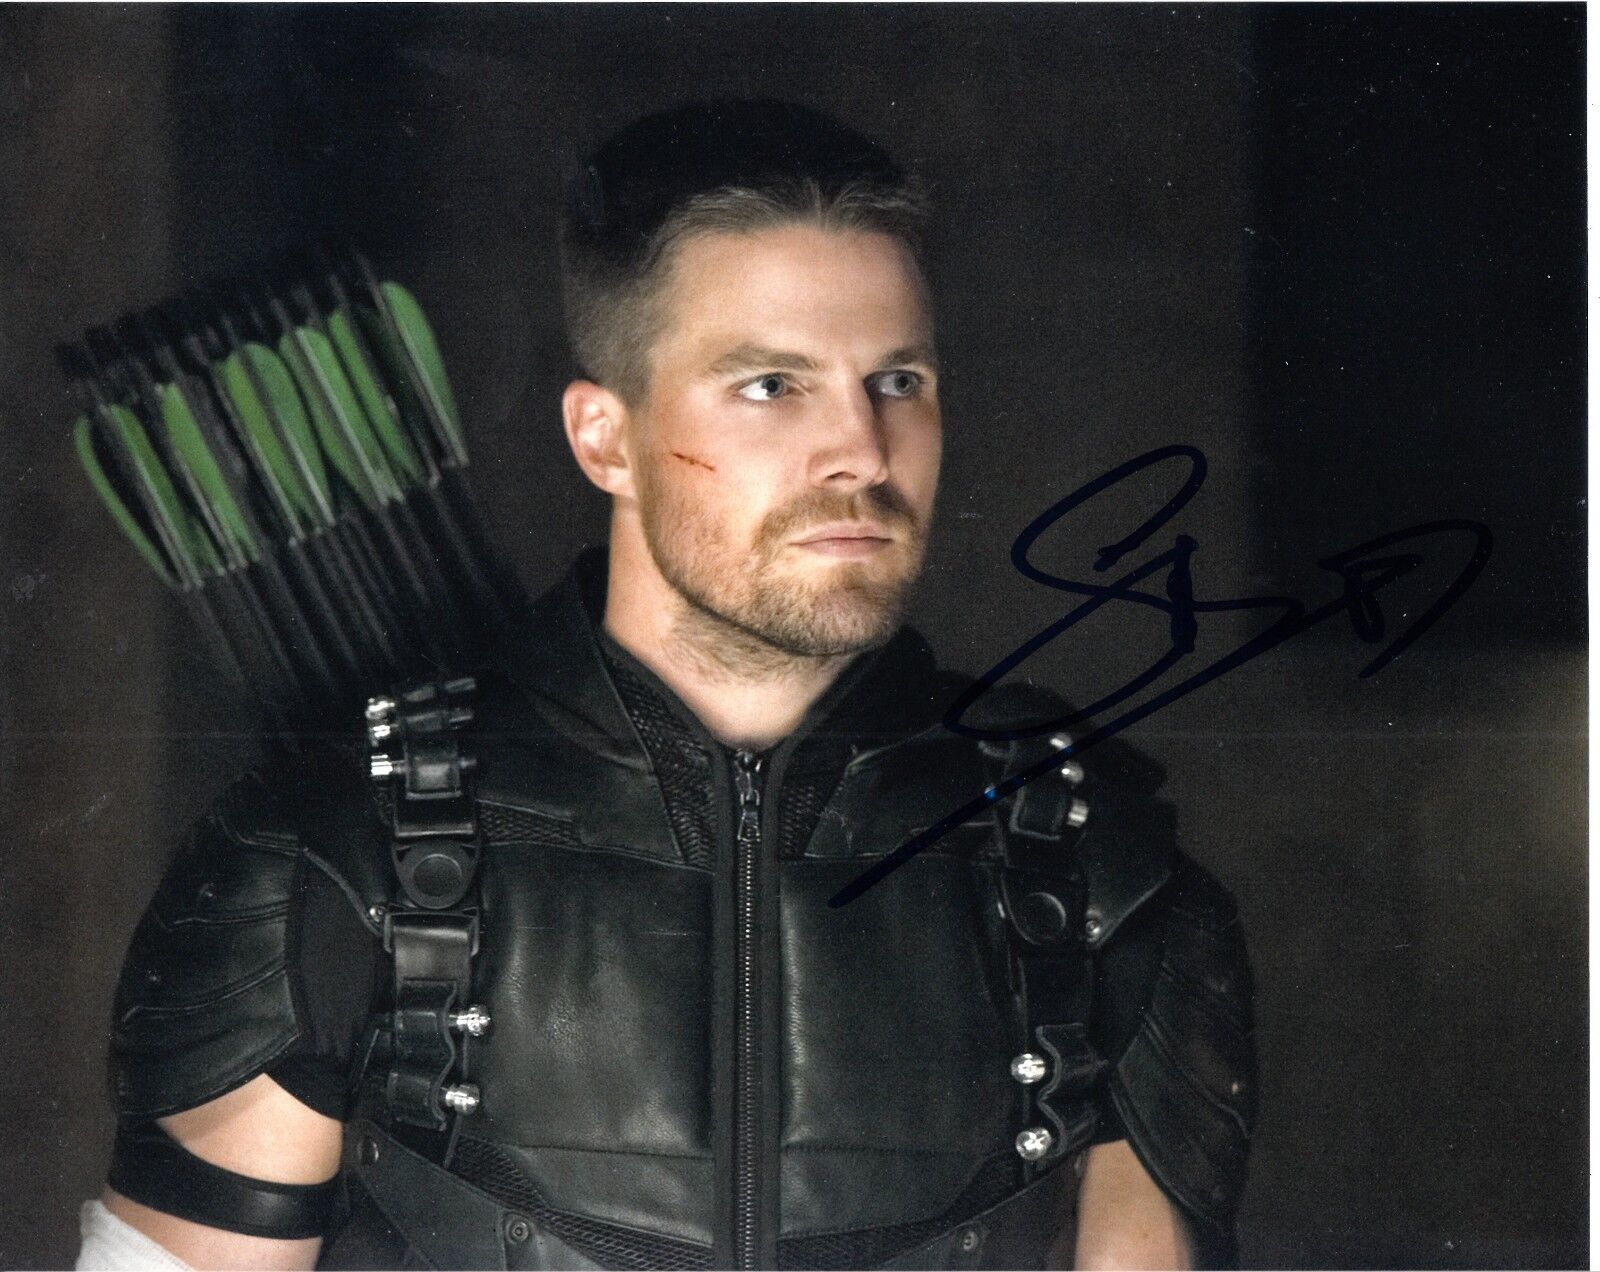 STEPHEN AMELL SIGNED ARROW Photo Poster painting UACC REG 242 (8)